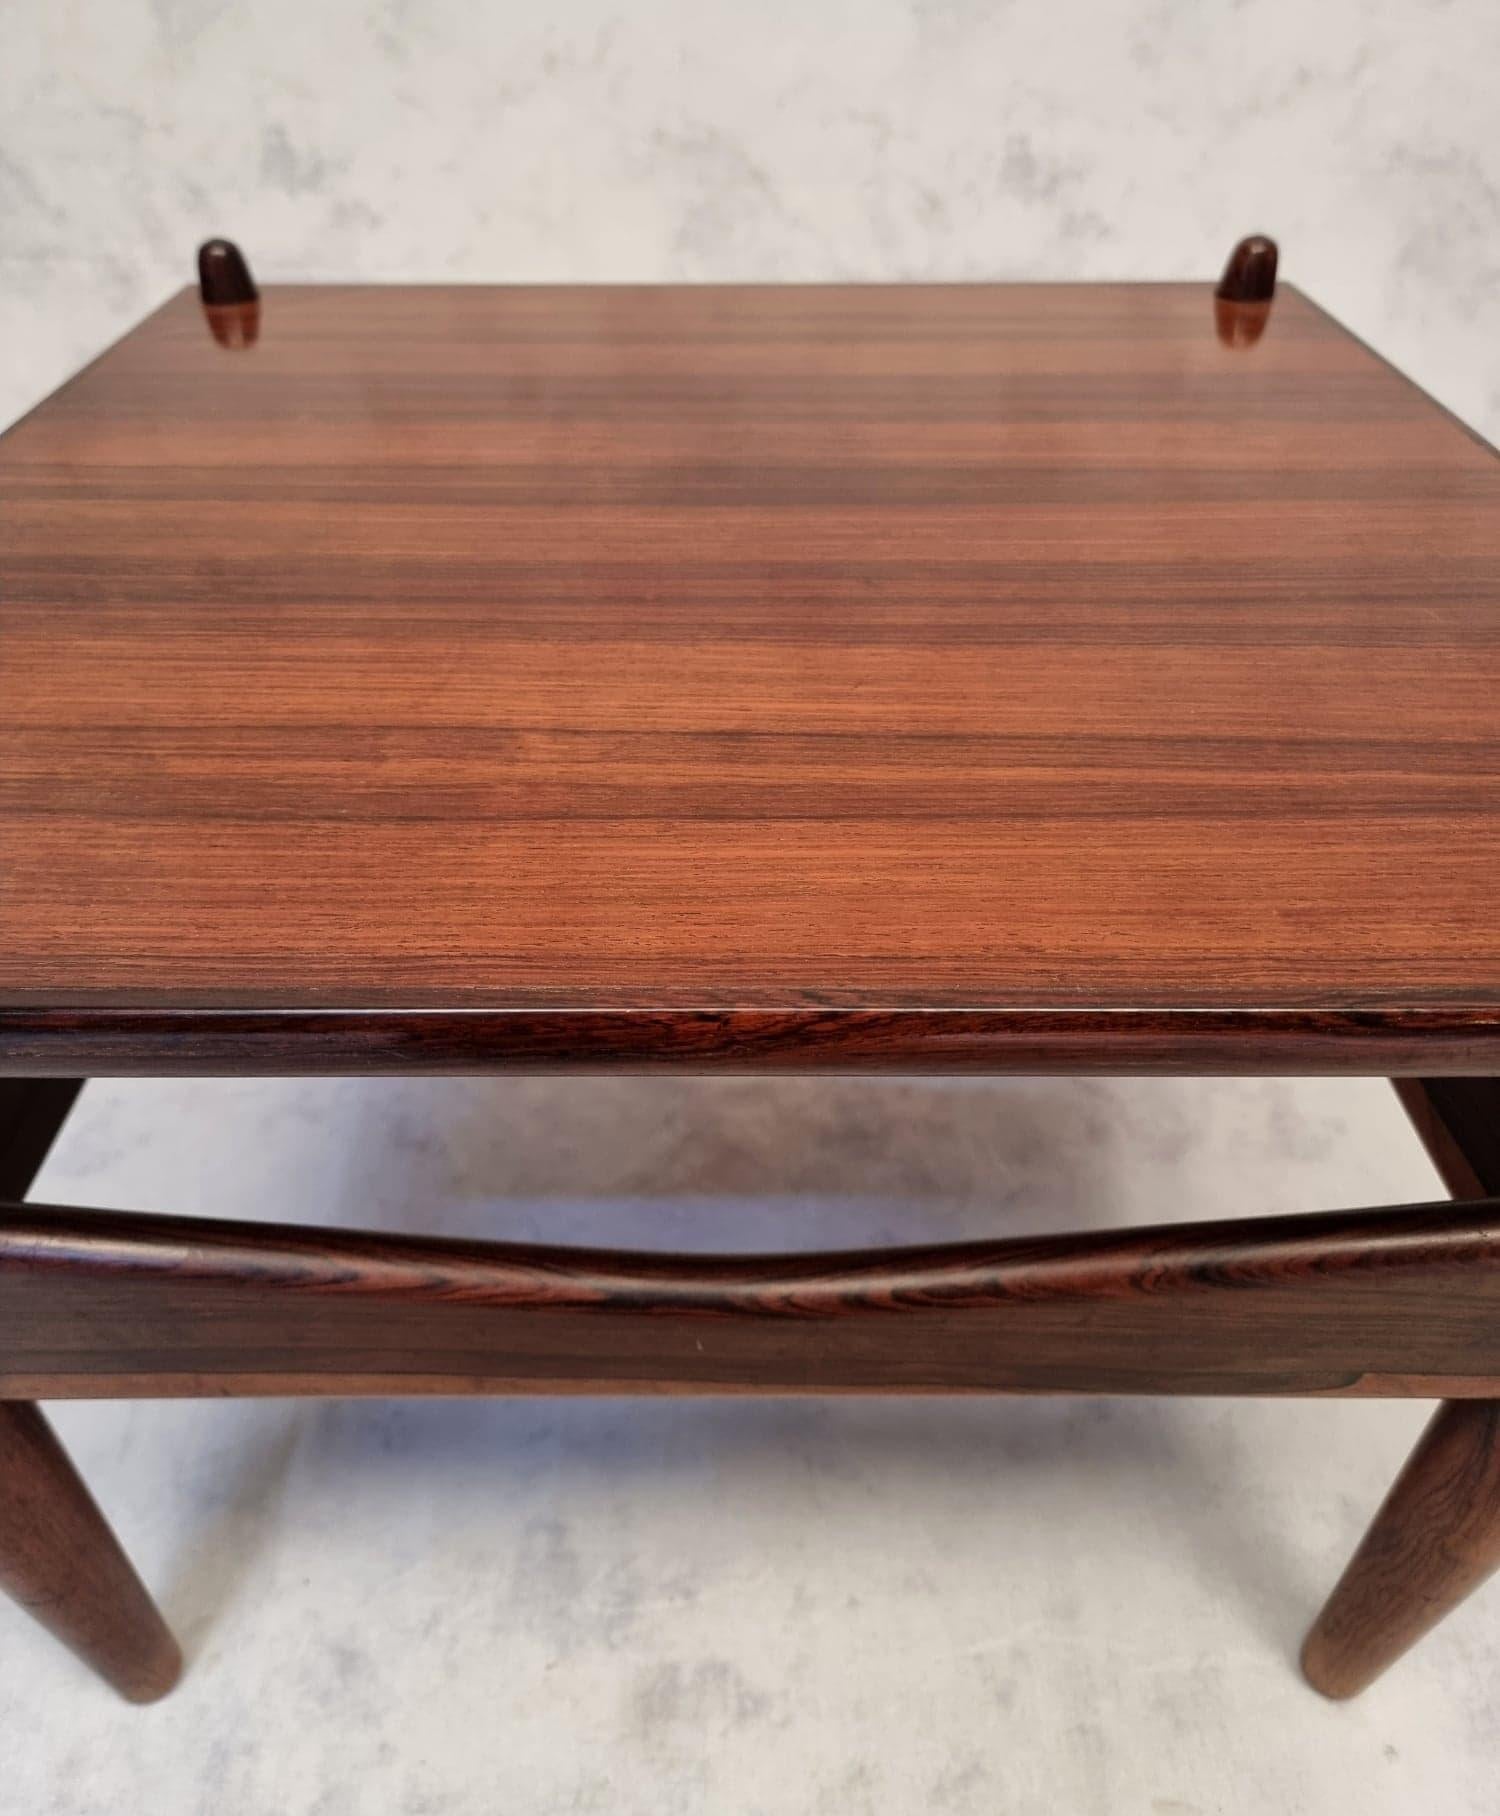 Pair Of Side Tables By Illum Wikkelsø – N°272, Rosewood, Ca 1950 For Sale 6